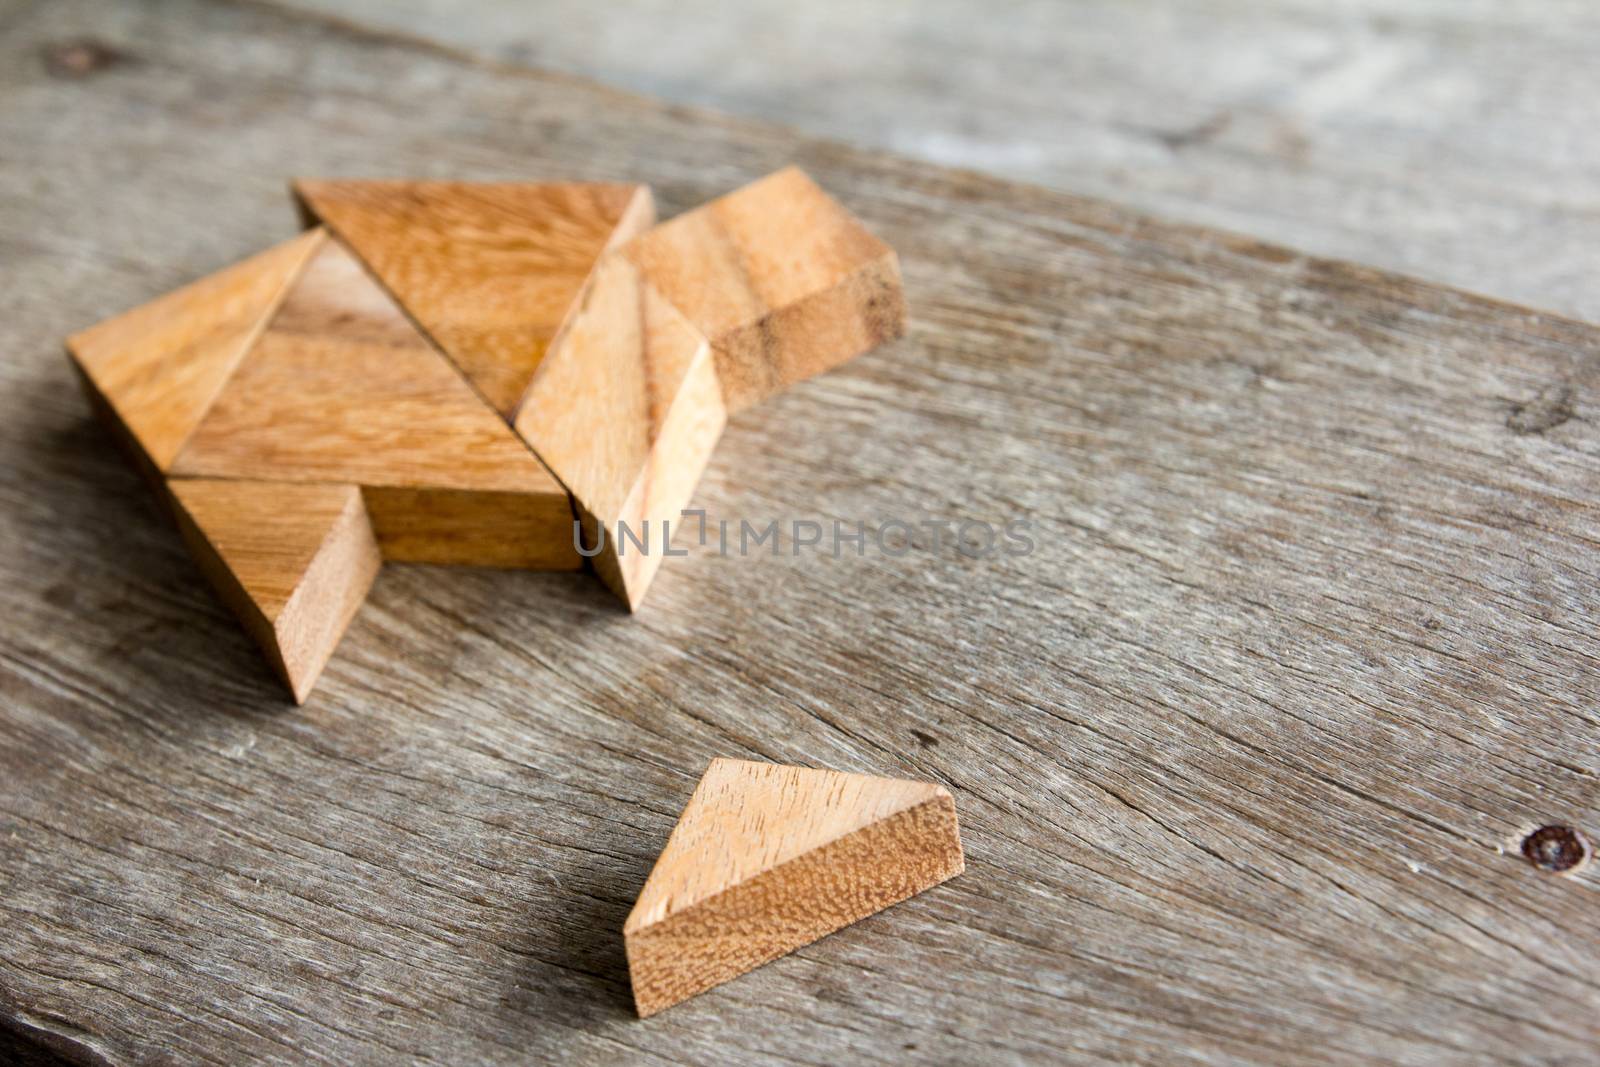 Wooden tangram puzzle wait to fulfill home shape for build dream by Hengpattanapong